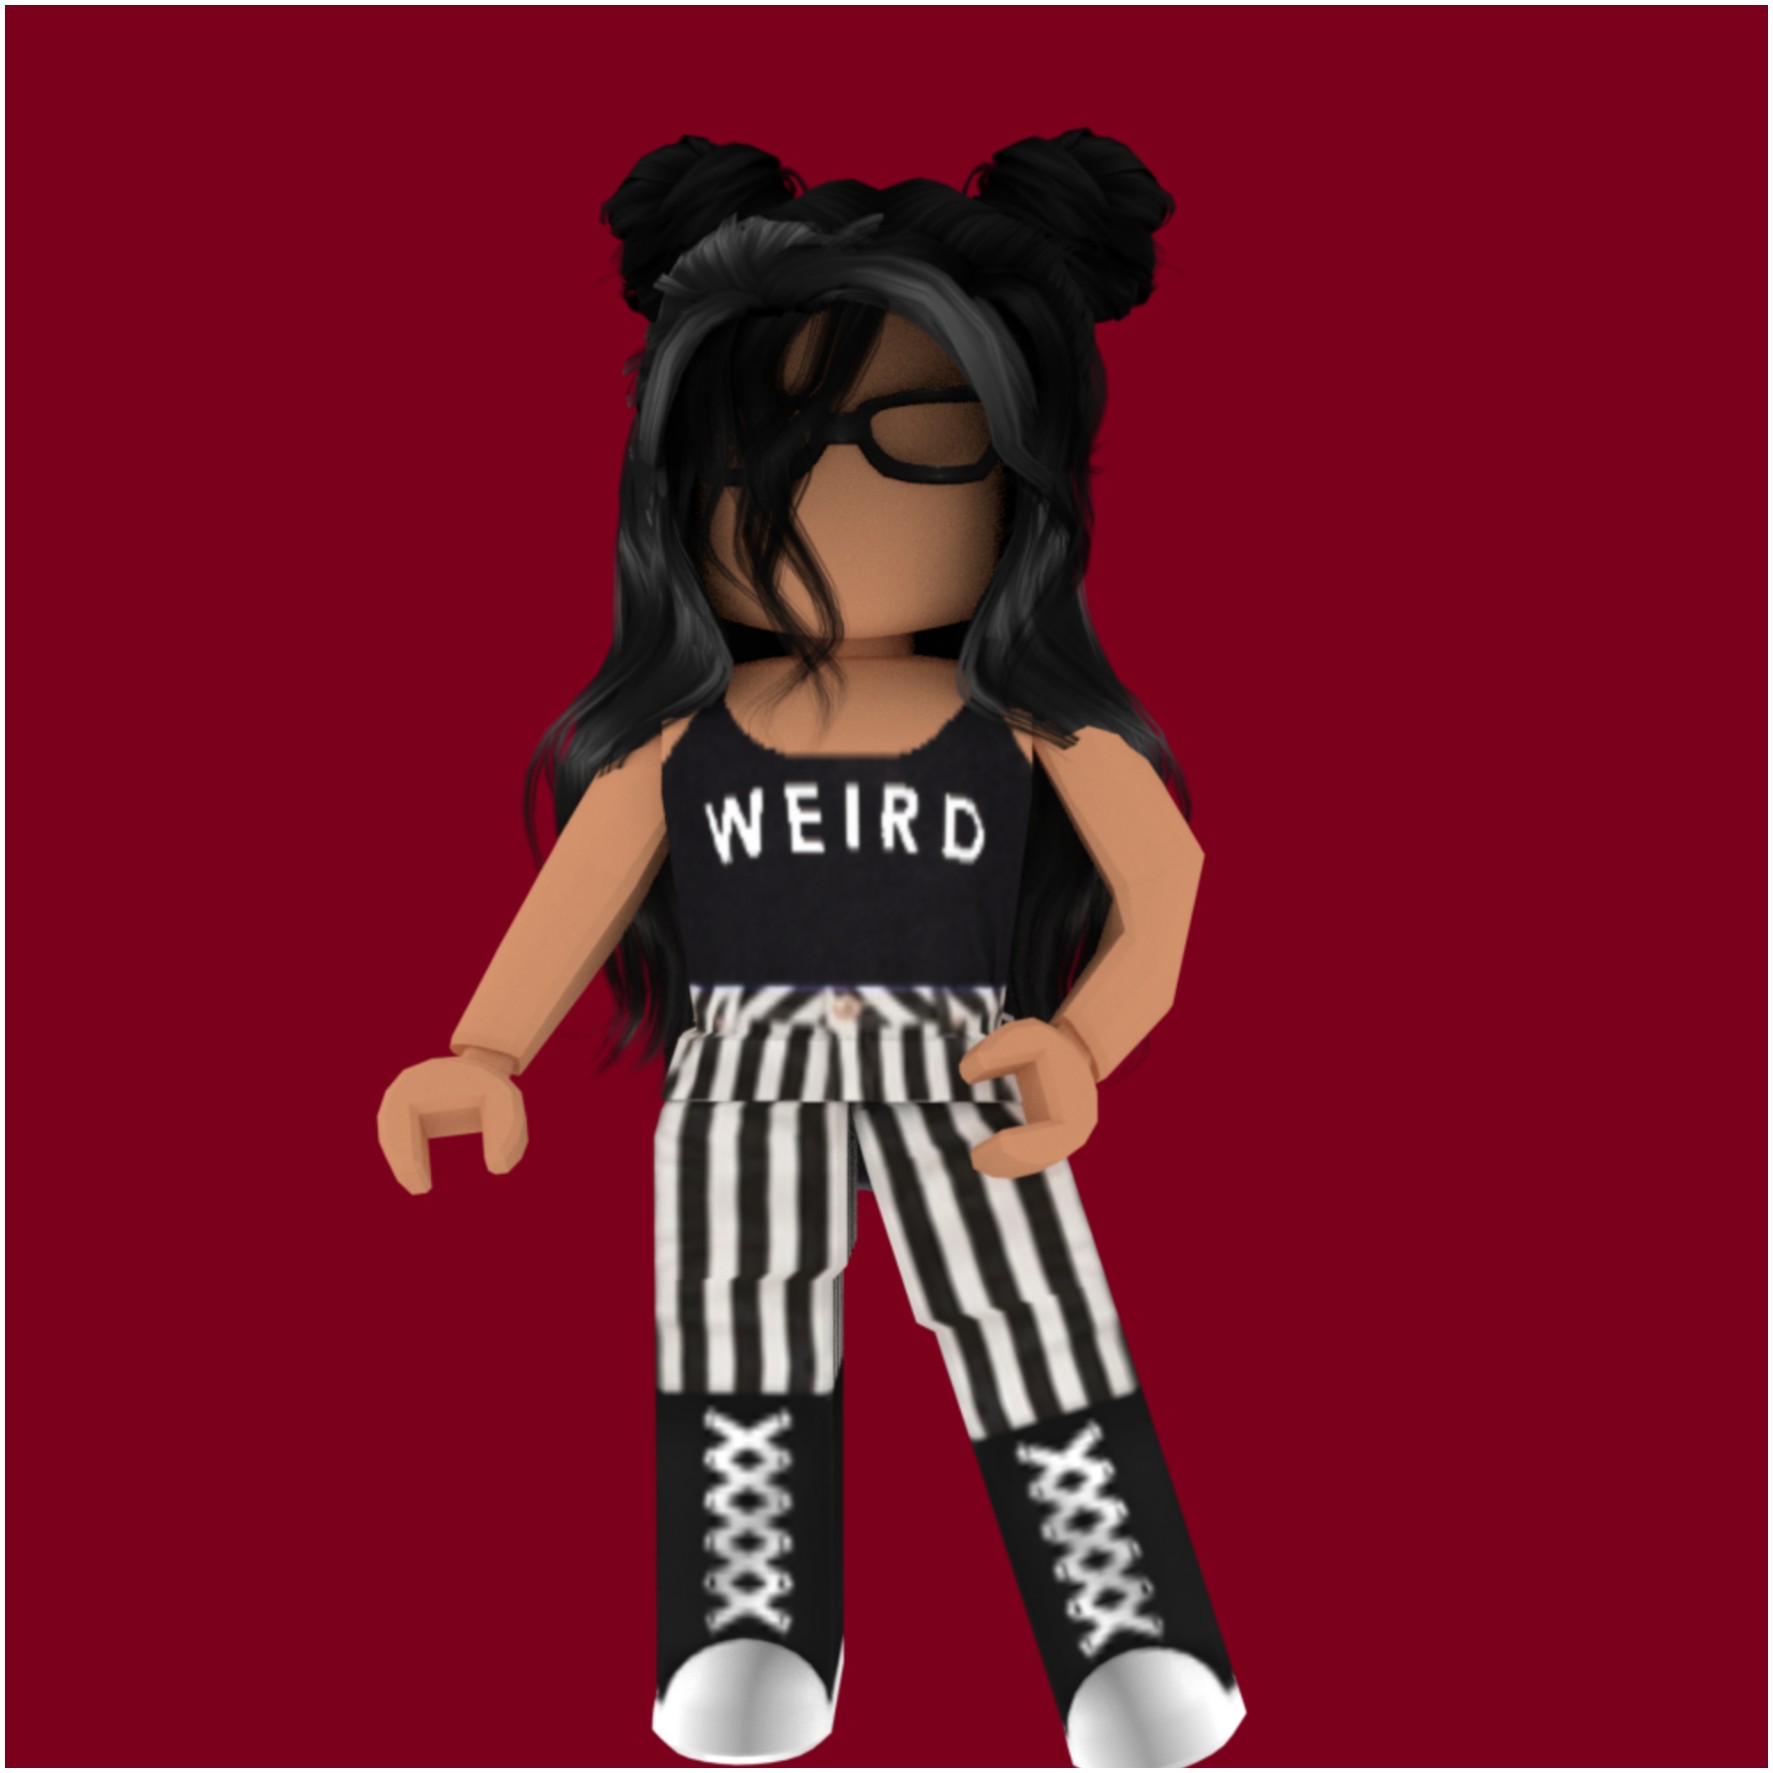 Idk Roblox Gfx Robloxgfx Image By Elaine - idk why roblox